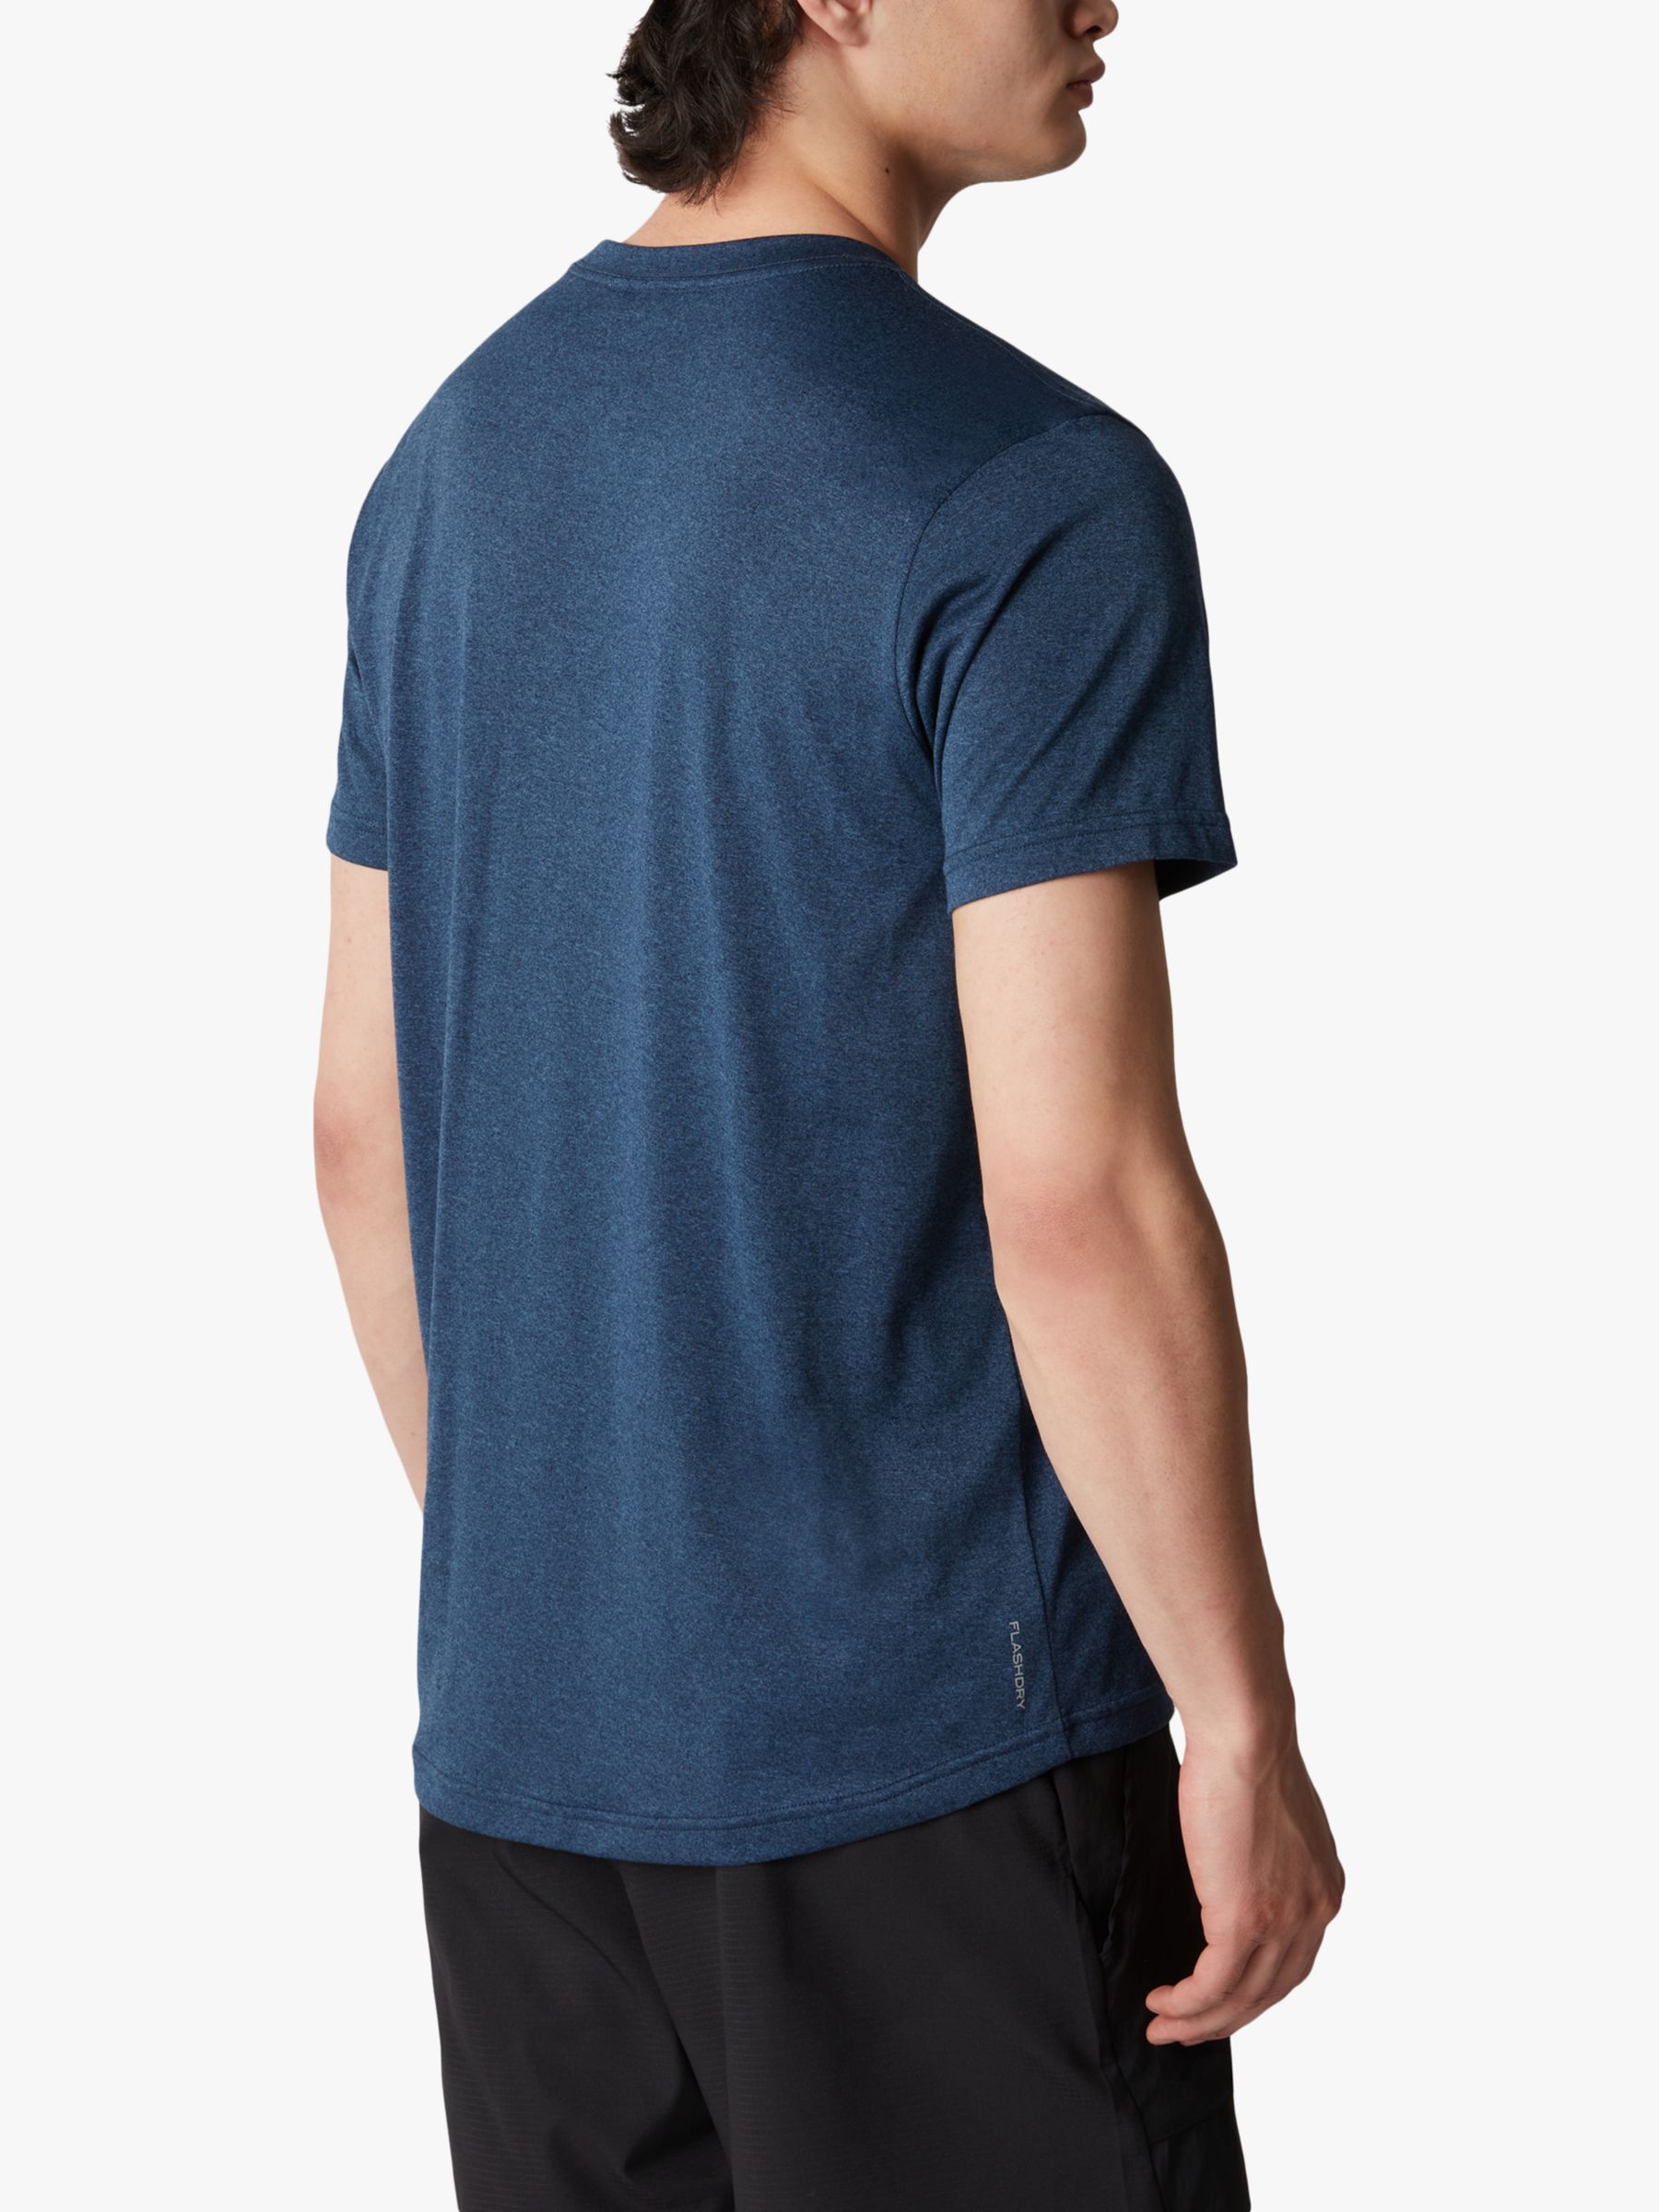 The North Face Reaxion Amp T-Shirt, Blue Heather, L